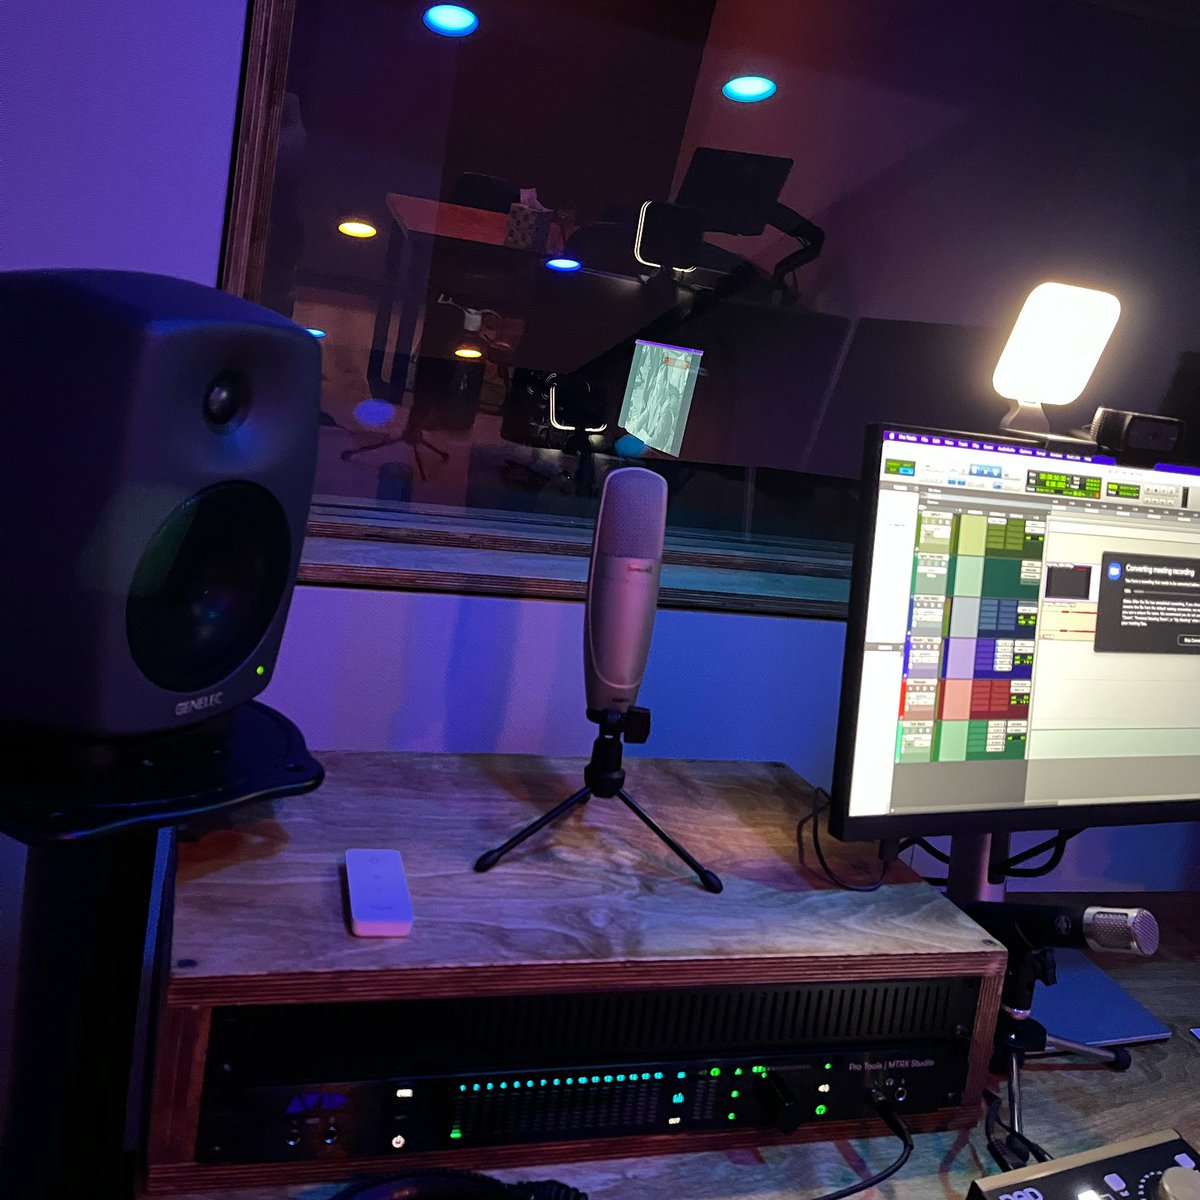 Early morning session vibes ⛅️ 🎙️

#realvoicela #volife #voiceover #voiceovers #voiceoverlife #vocoach #voiceacting #voiceactor #voicetalent #VoiceActorLife #voiceoverartist #voiceovertalent #voiceoveractor #actor #actress #locator #childactor #sourceconnect #casting